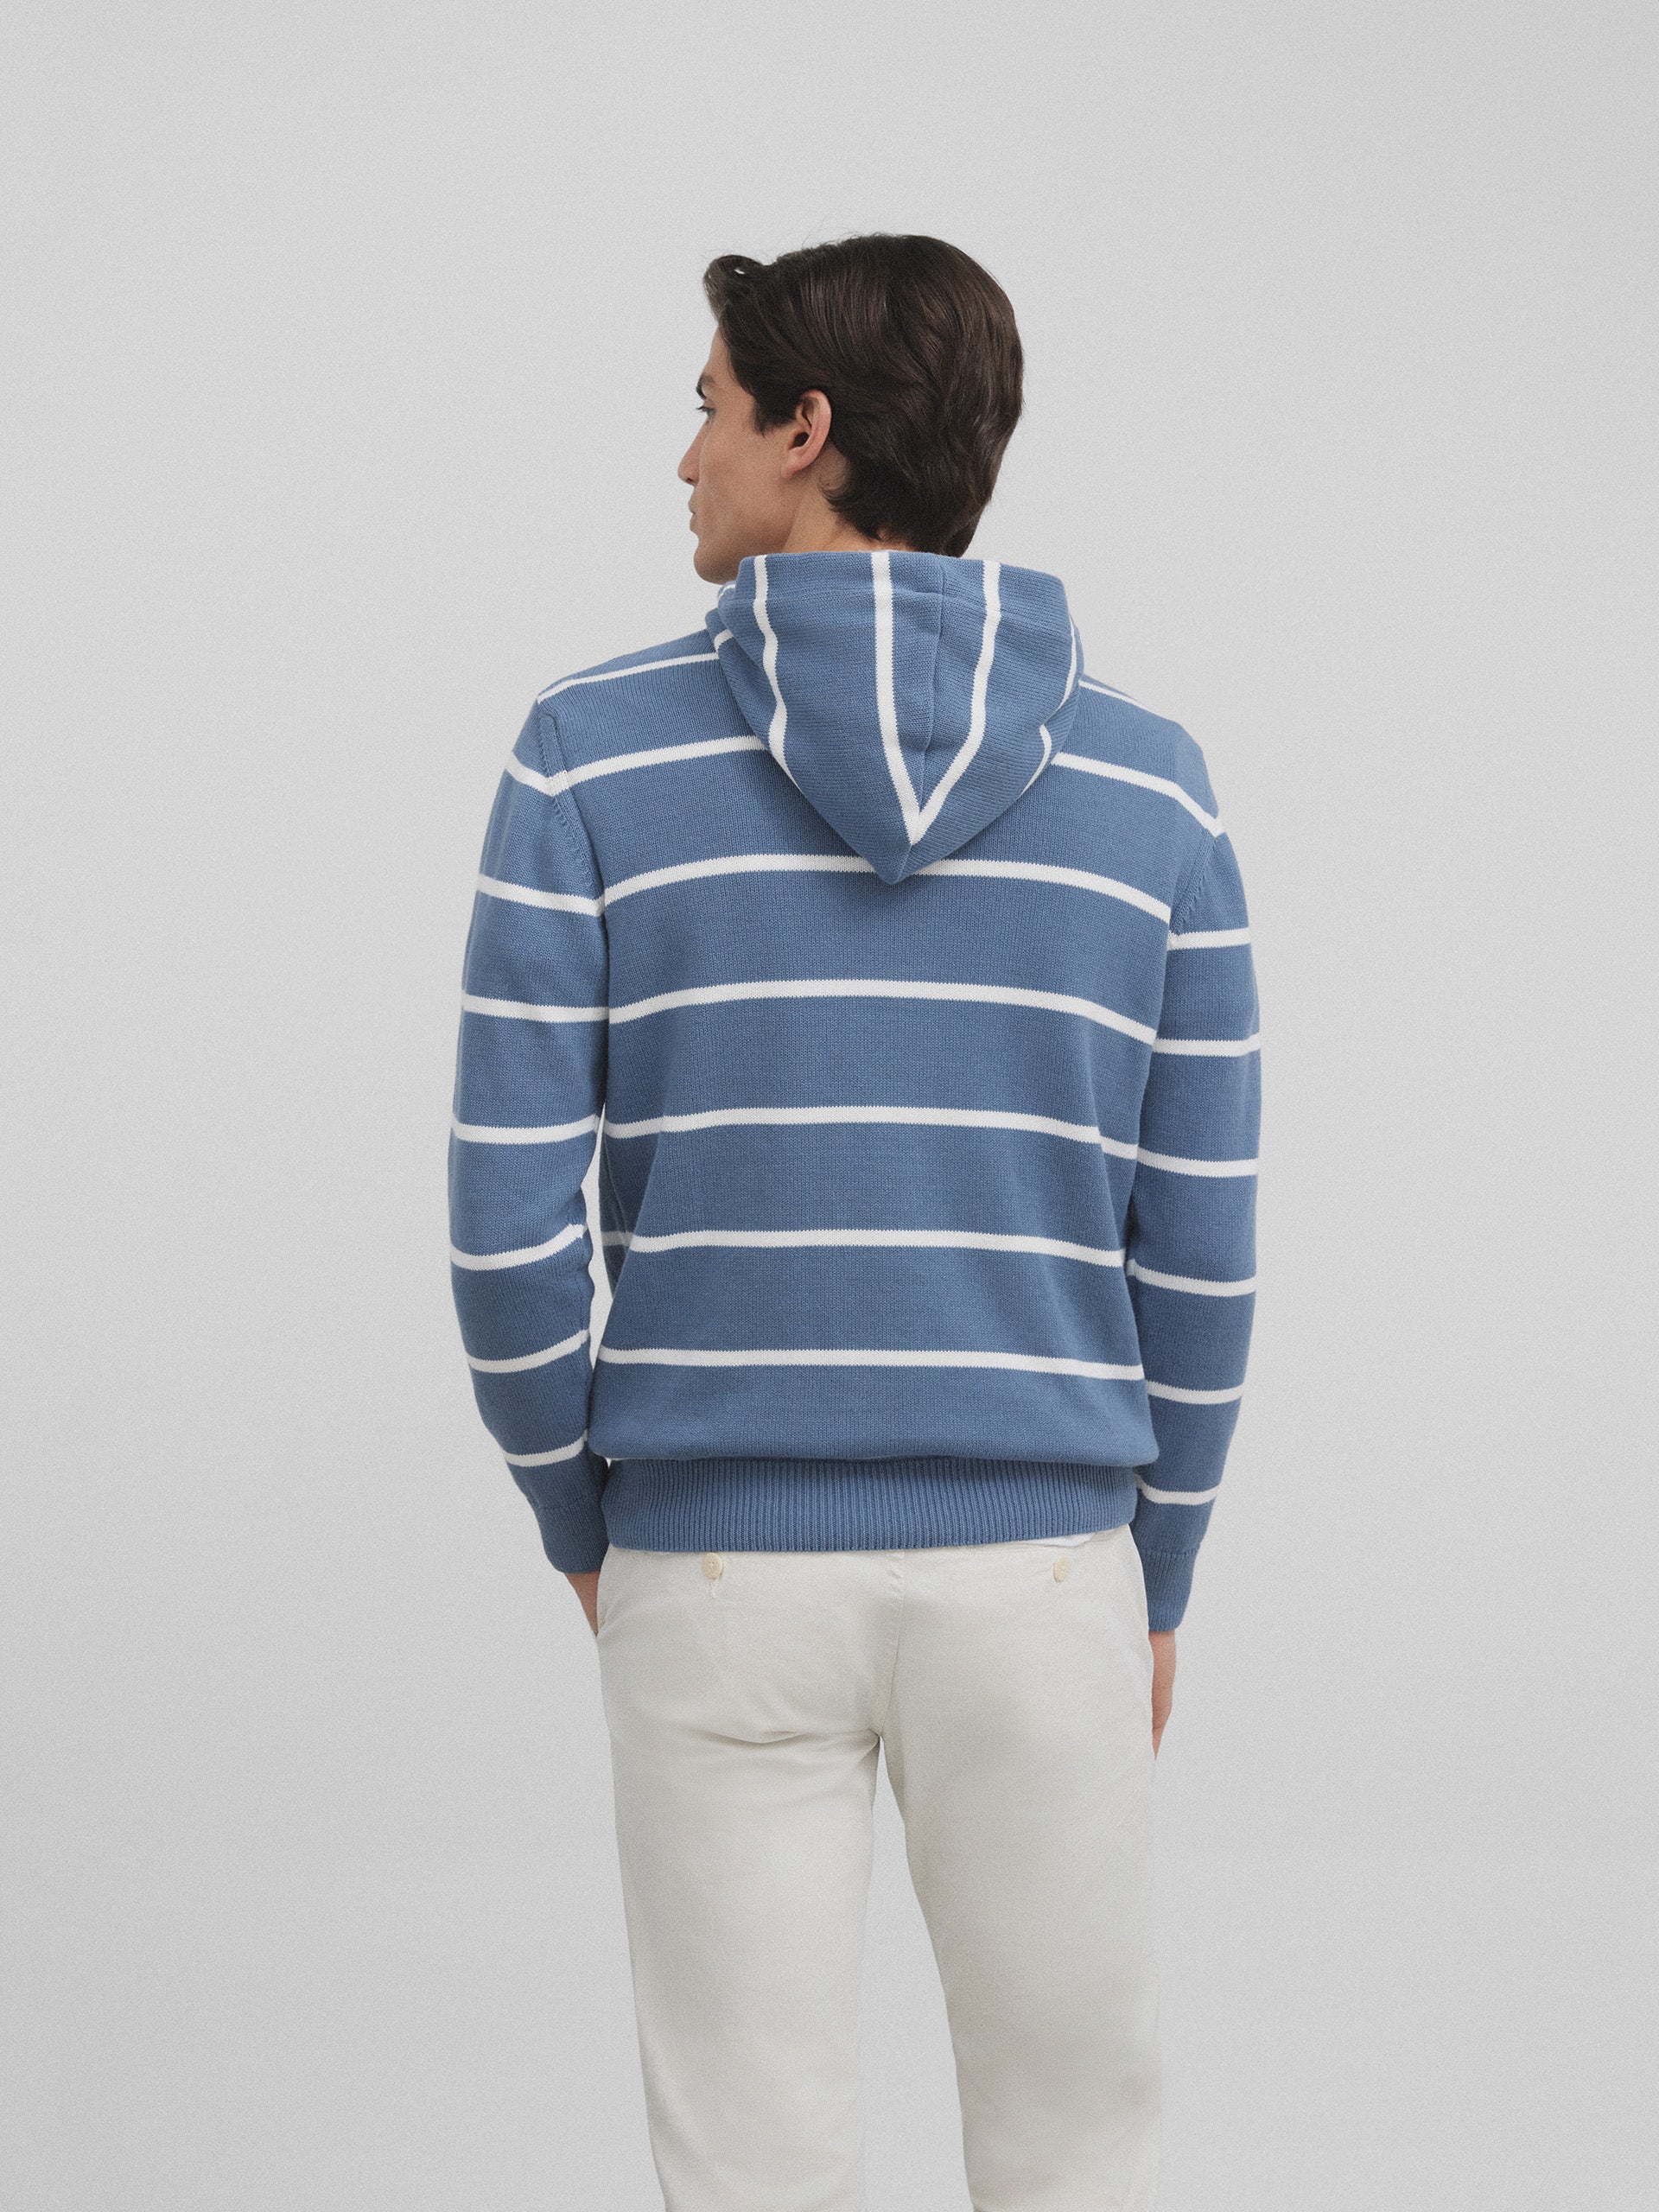 Blue striped hooded sweater